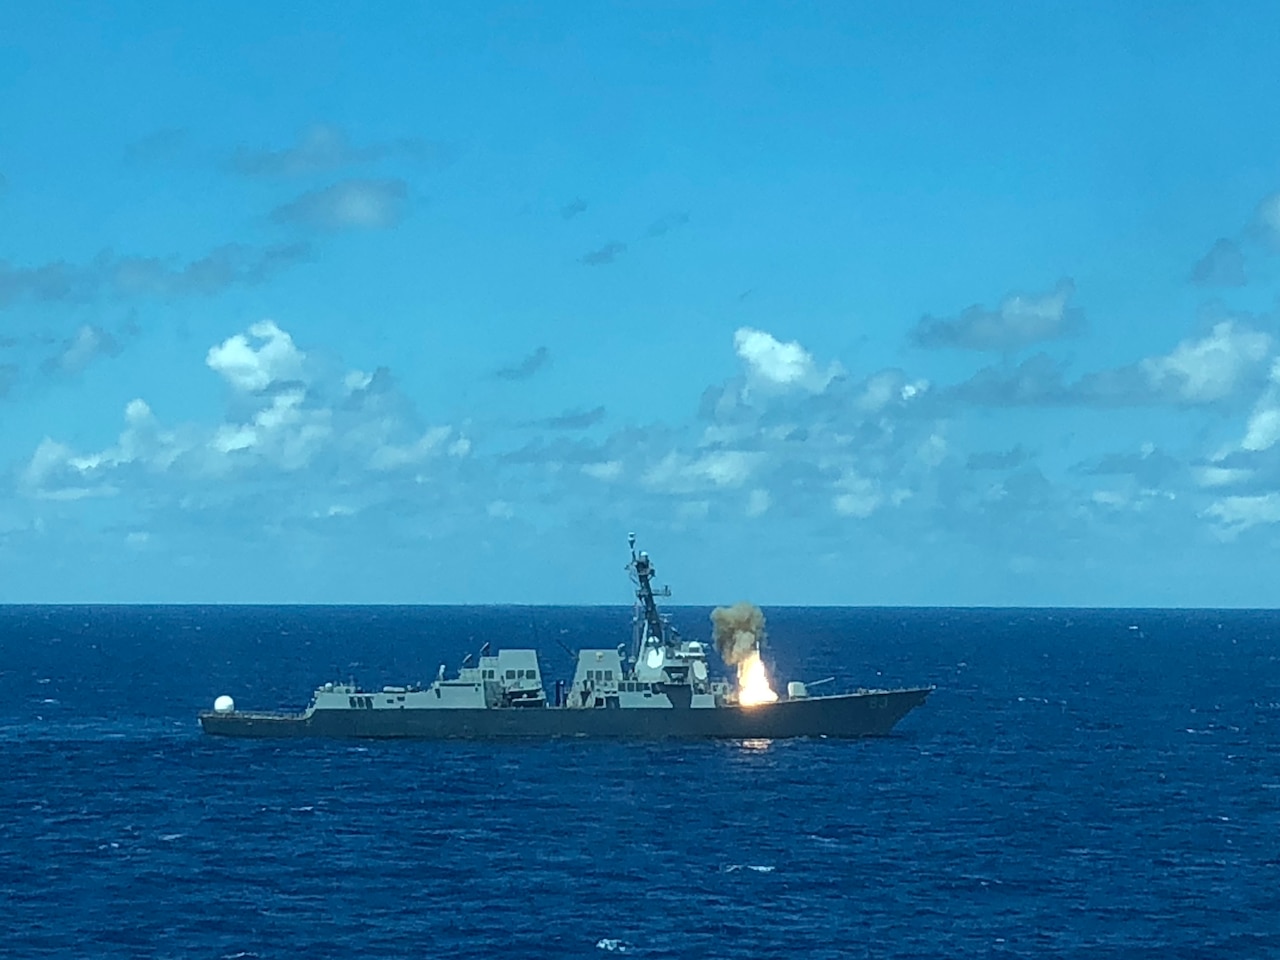 A ship floating in blue water fires a missile.